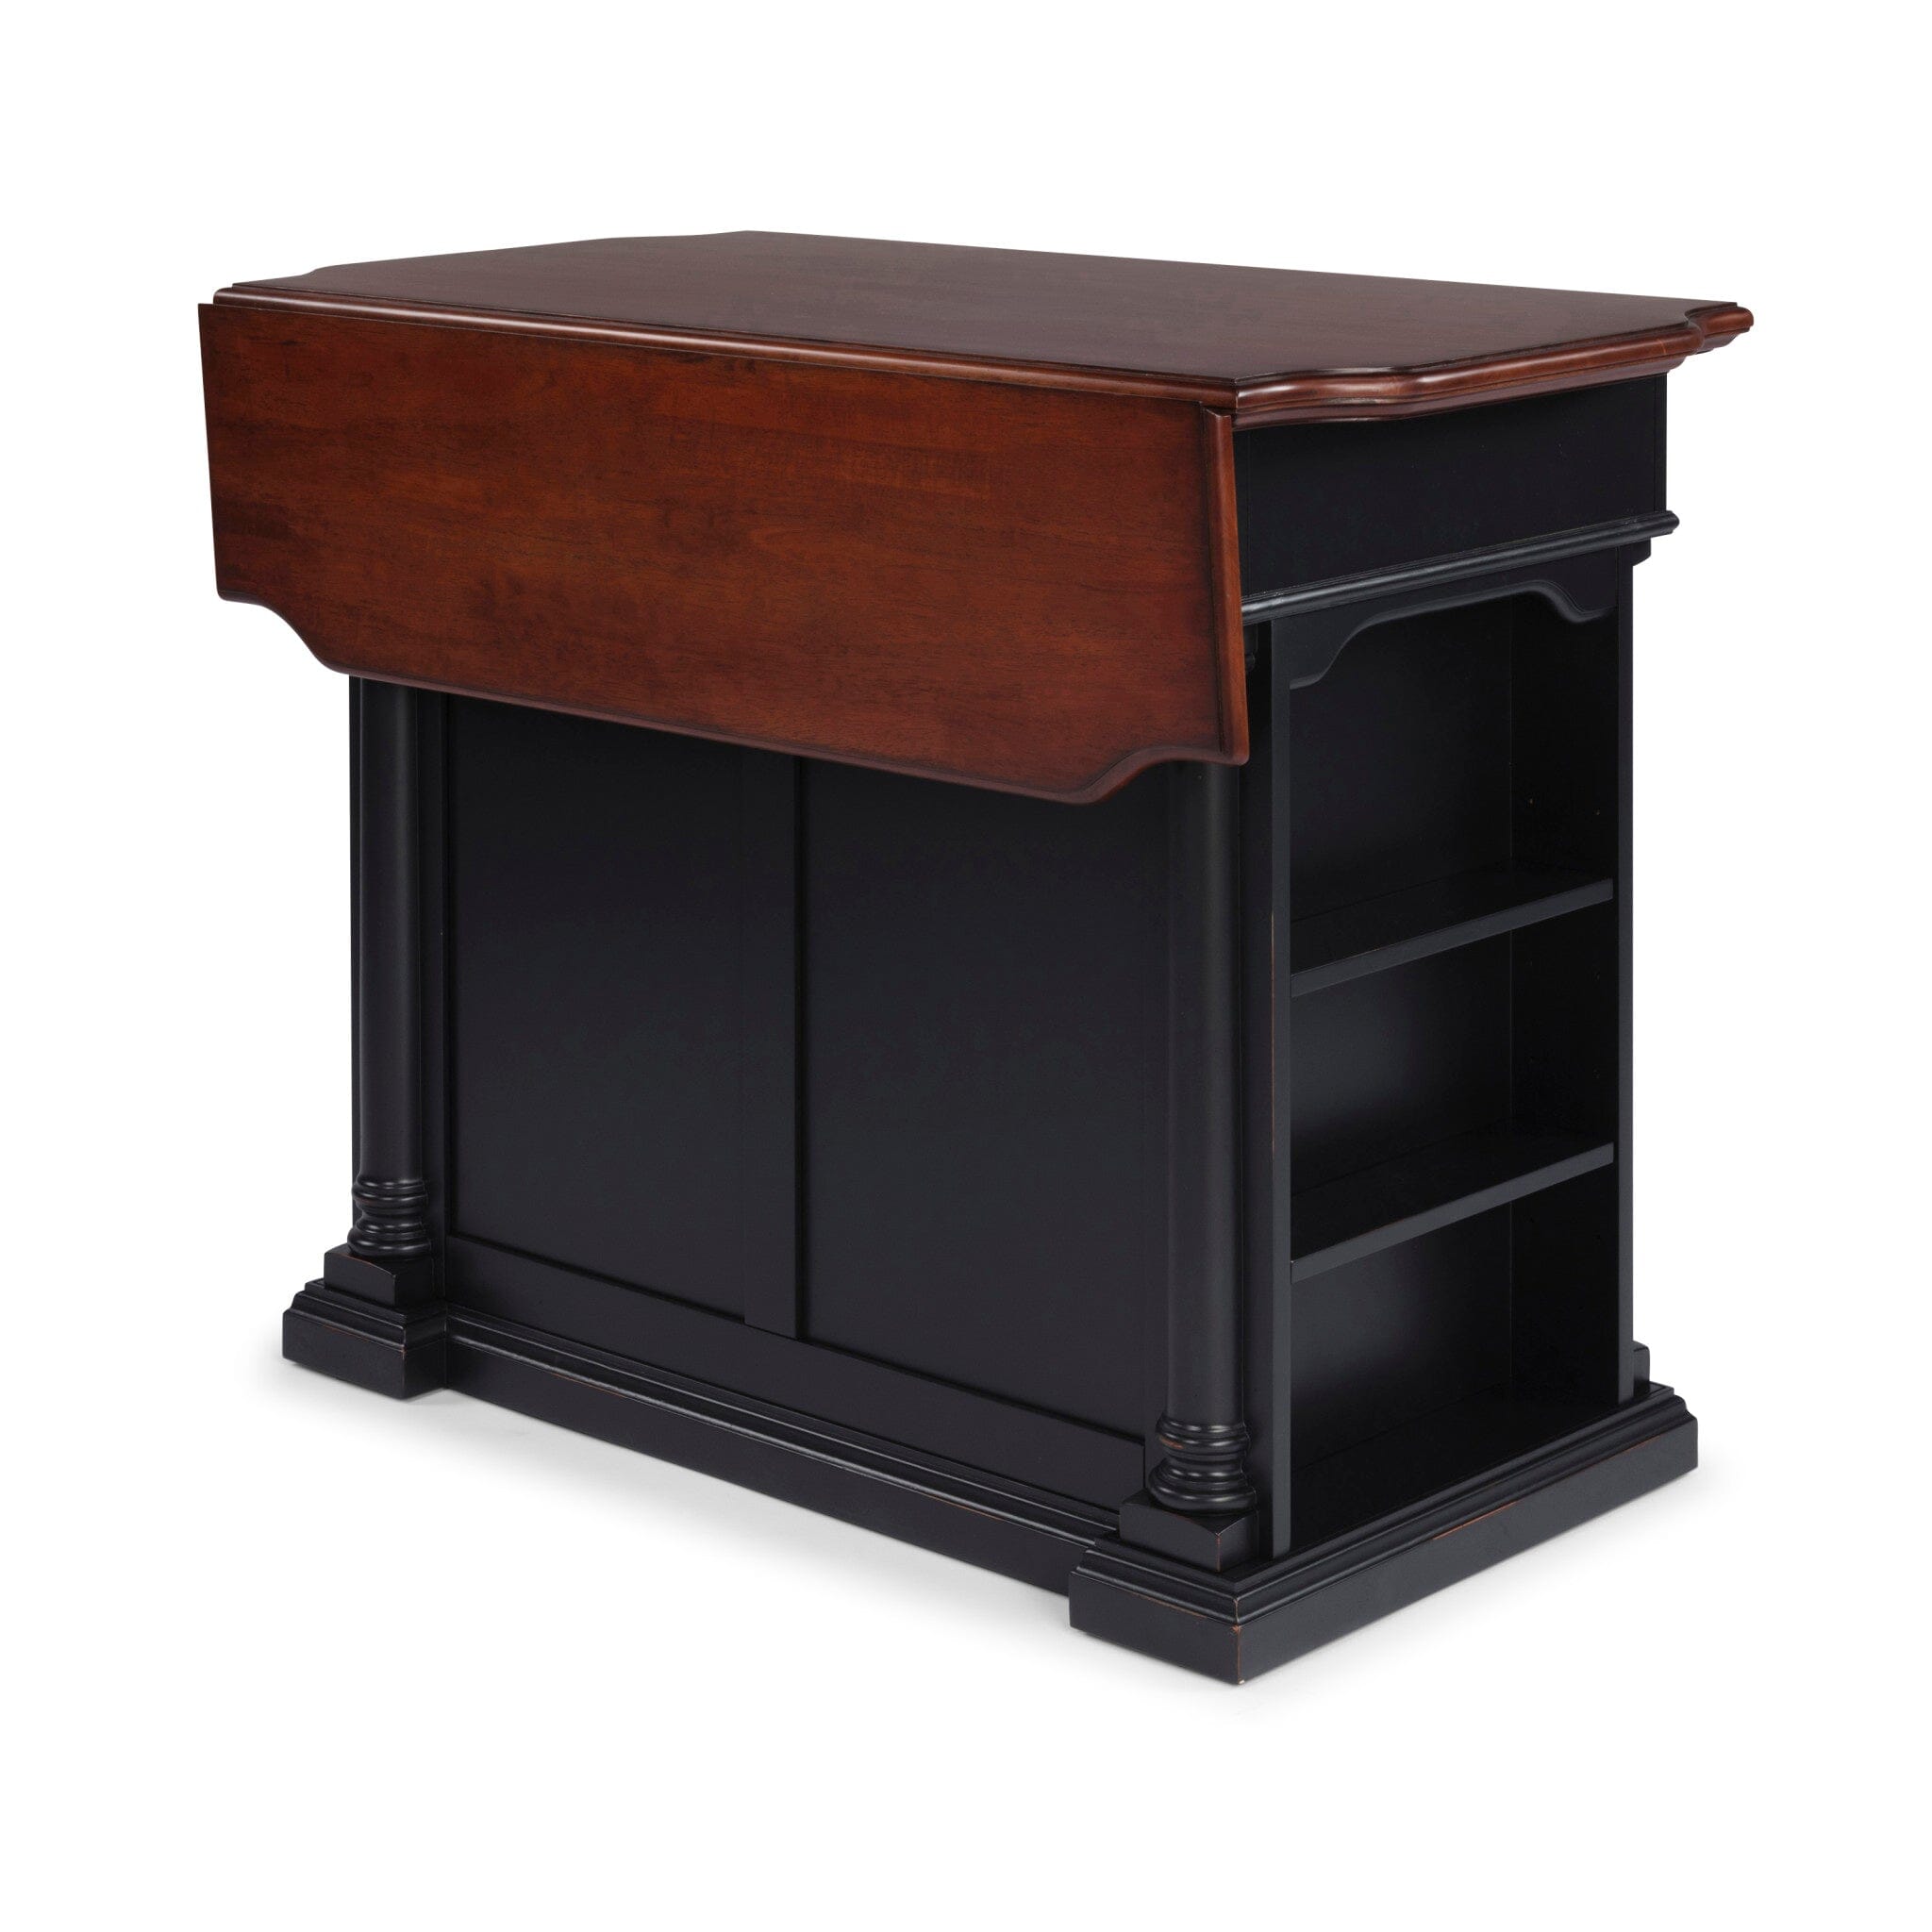 Traditional Kitchen Island By Beacon Hill Kitchen Island Beacon Hill